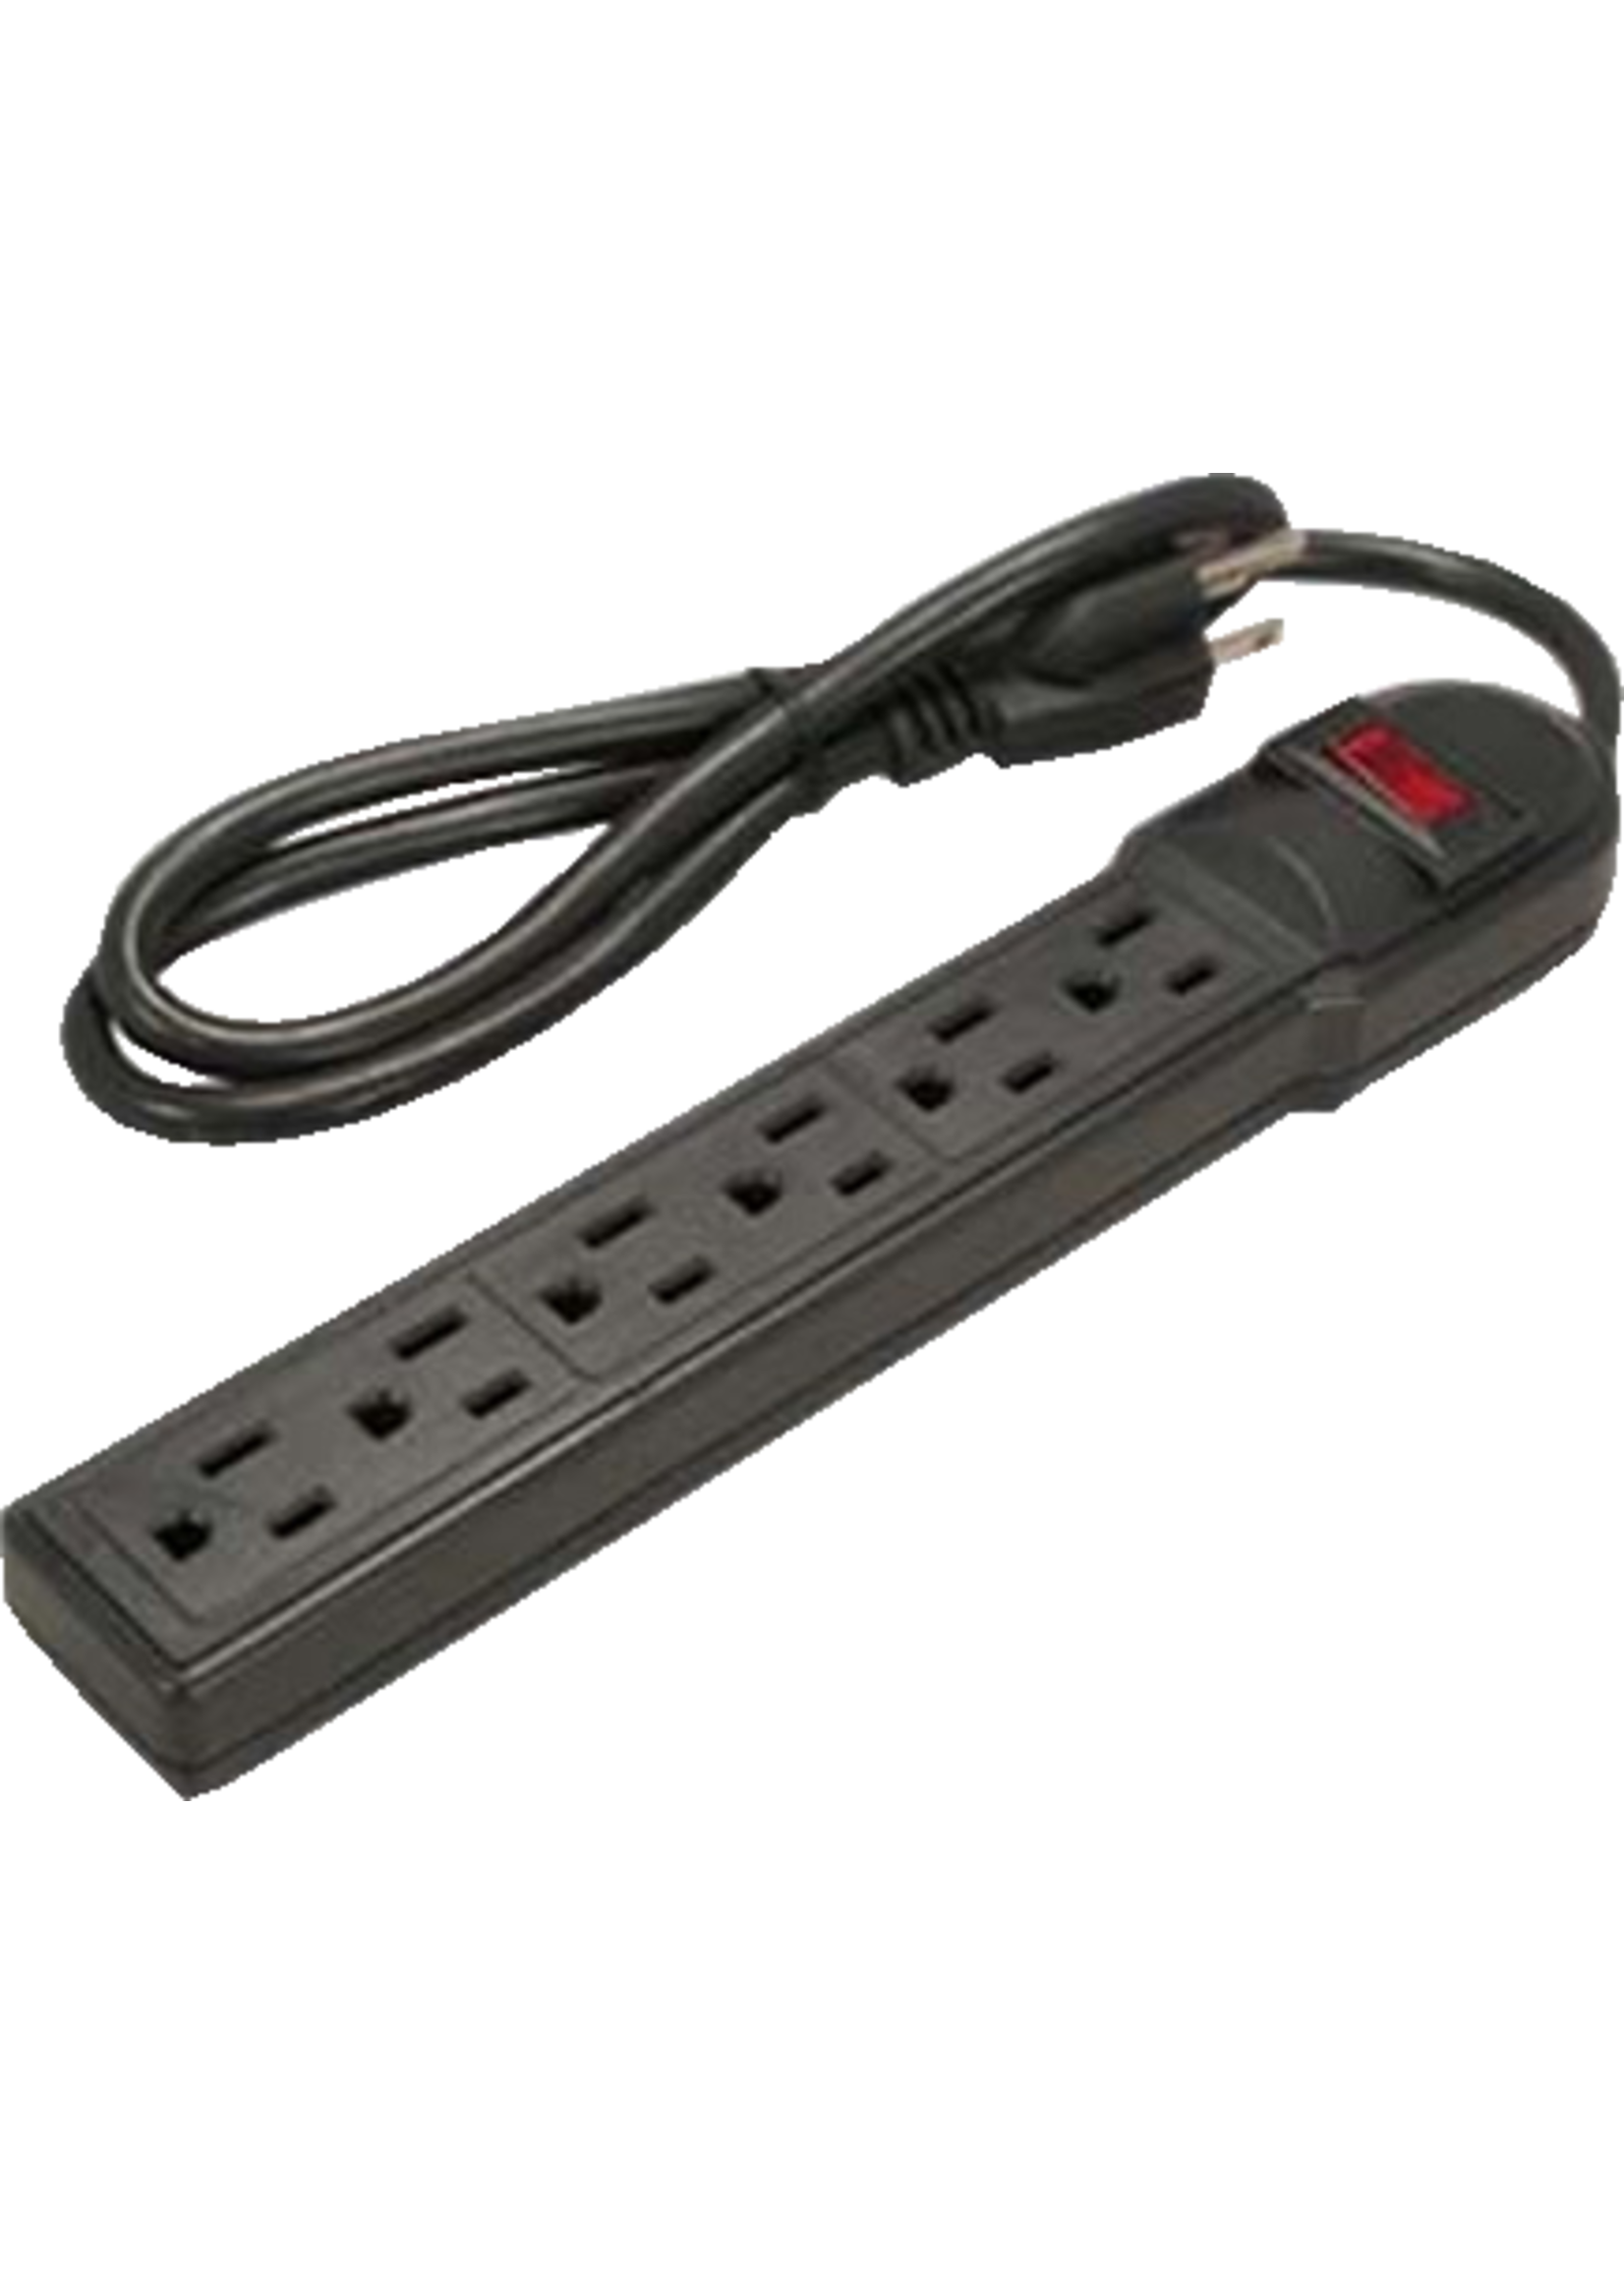 On Hand Surge Protector 6 Outlets Black